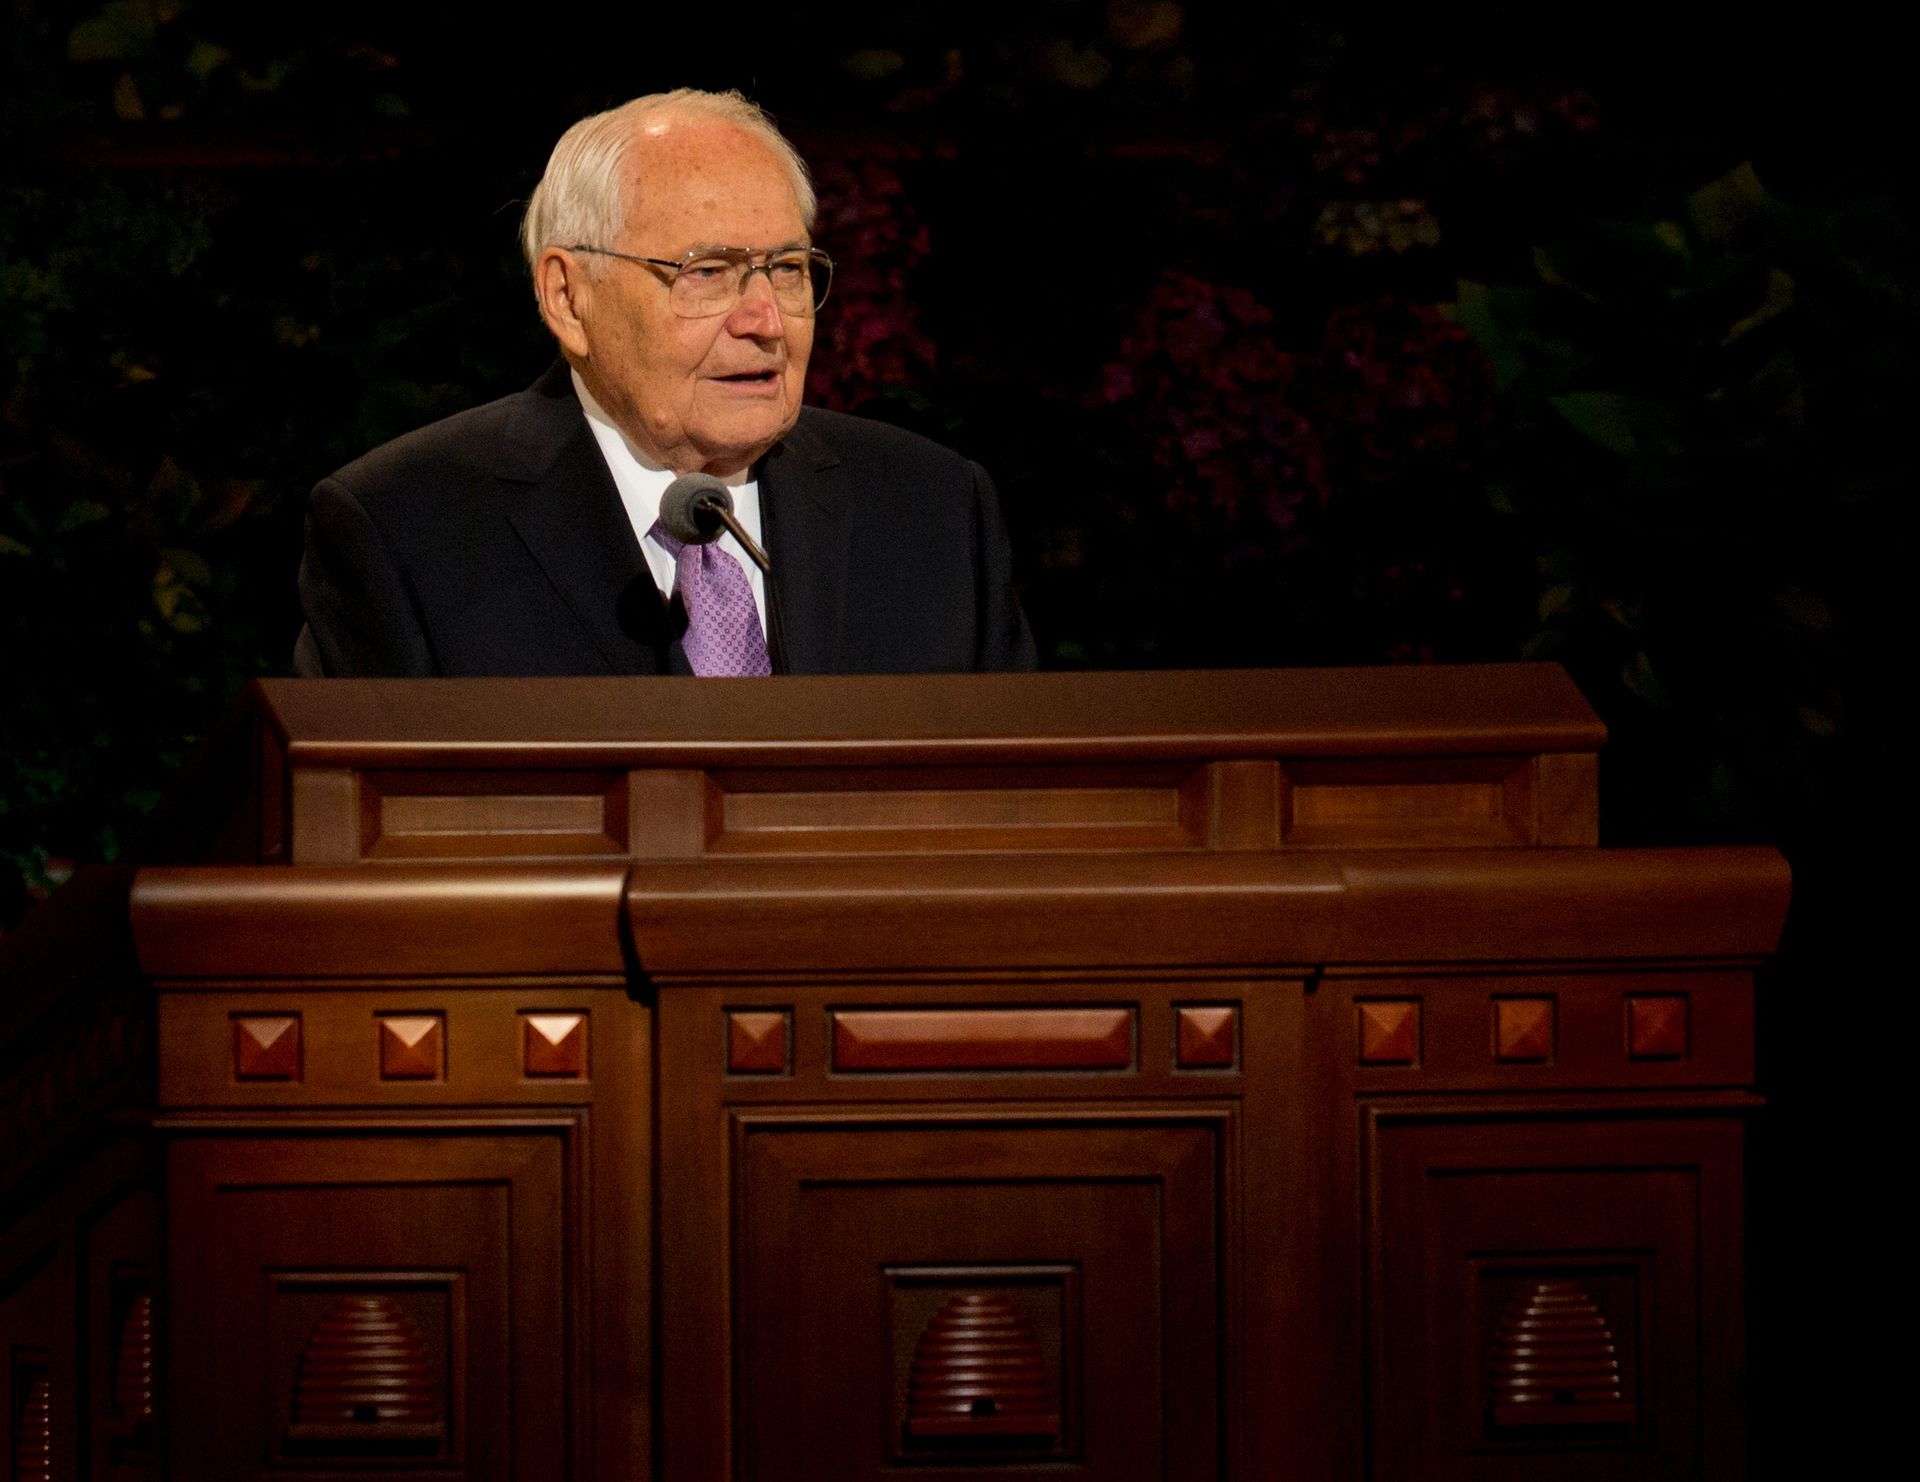 L. Tom Perry standing to speak to the congregation at general conference.